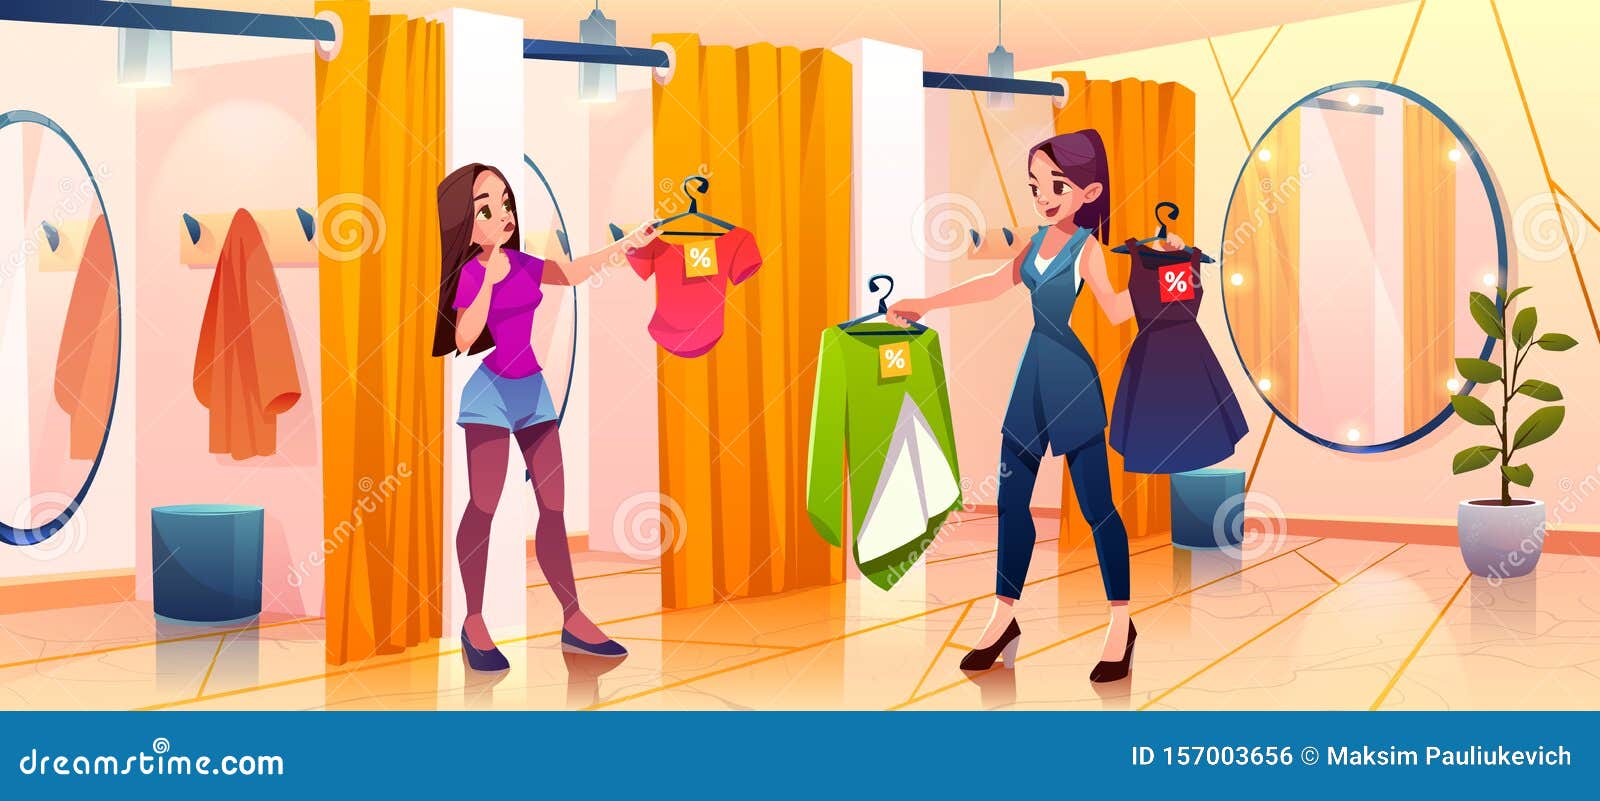 Changeroom Cartoons Illustrations Vector Stock Images Pictures To Download From